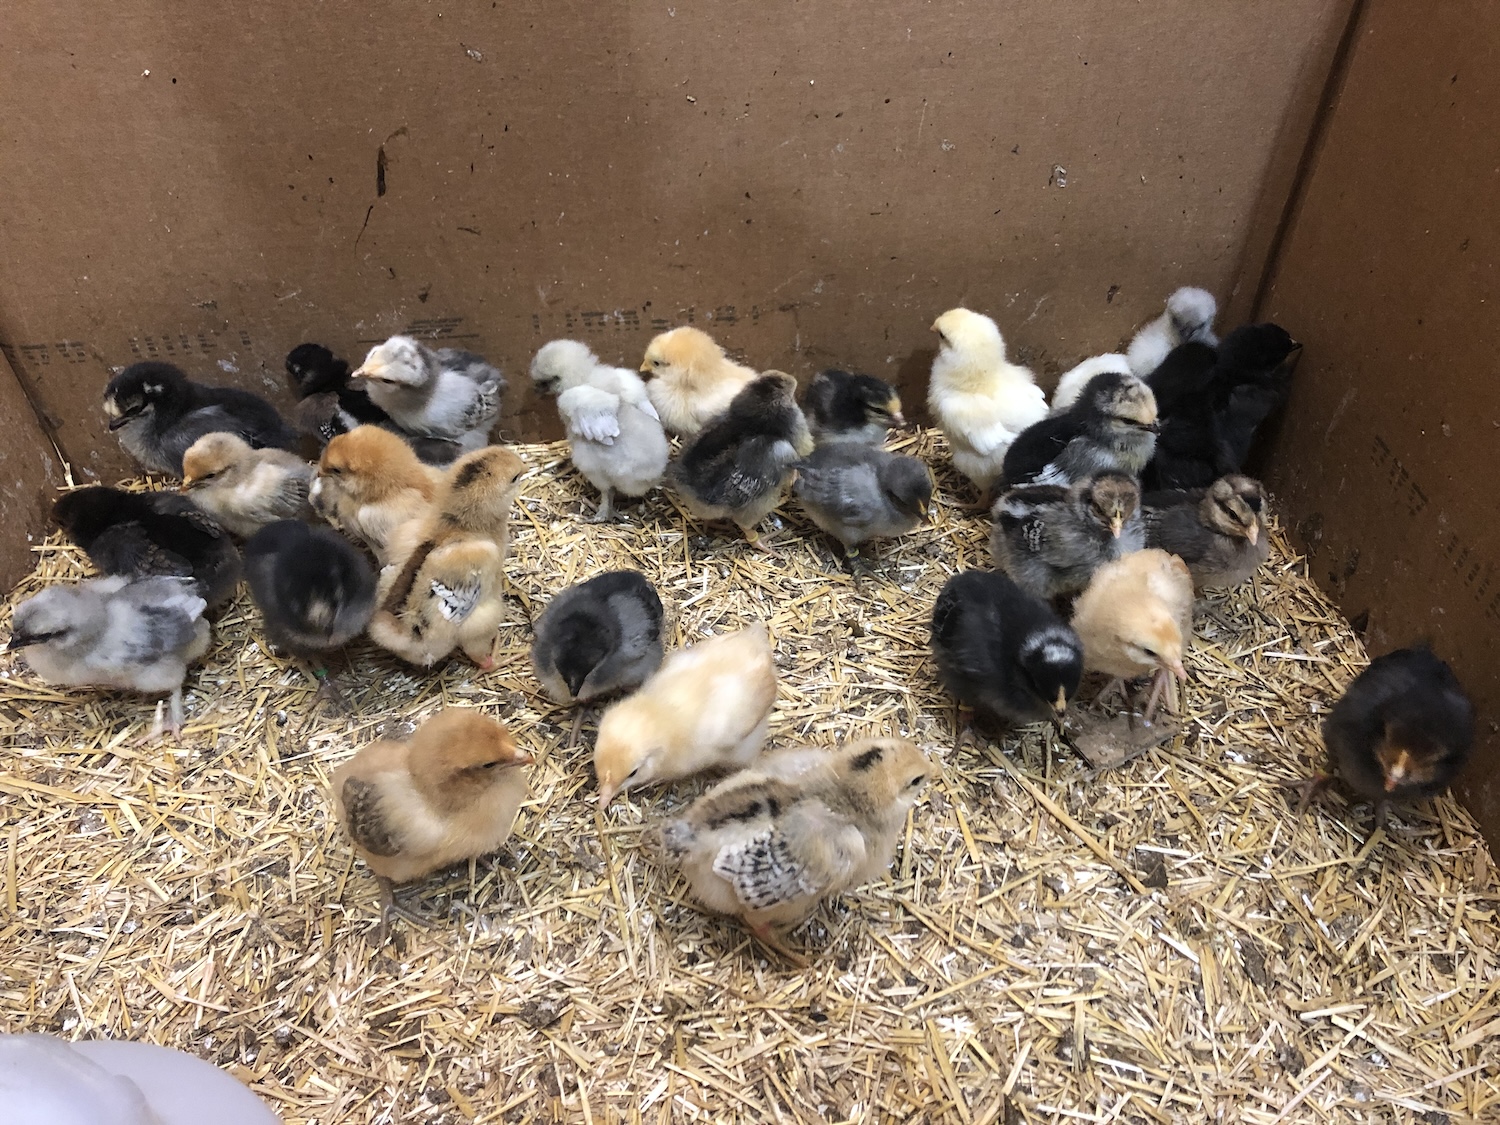 30 chicks spread out in a cardboard brooder box